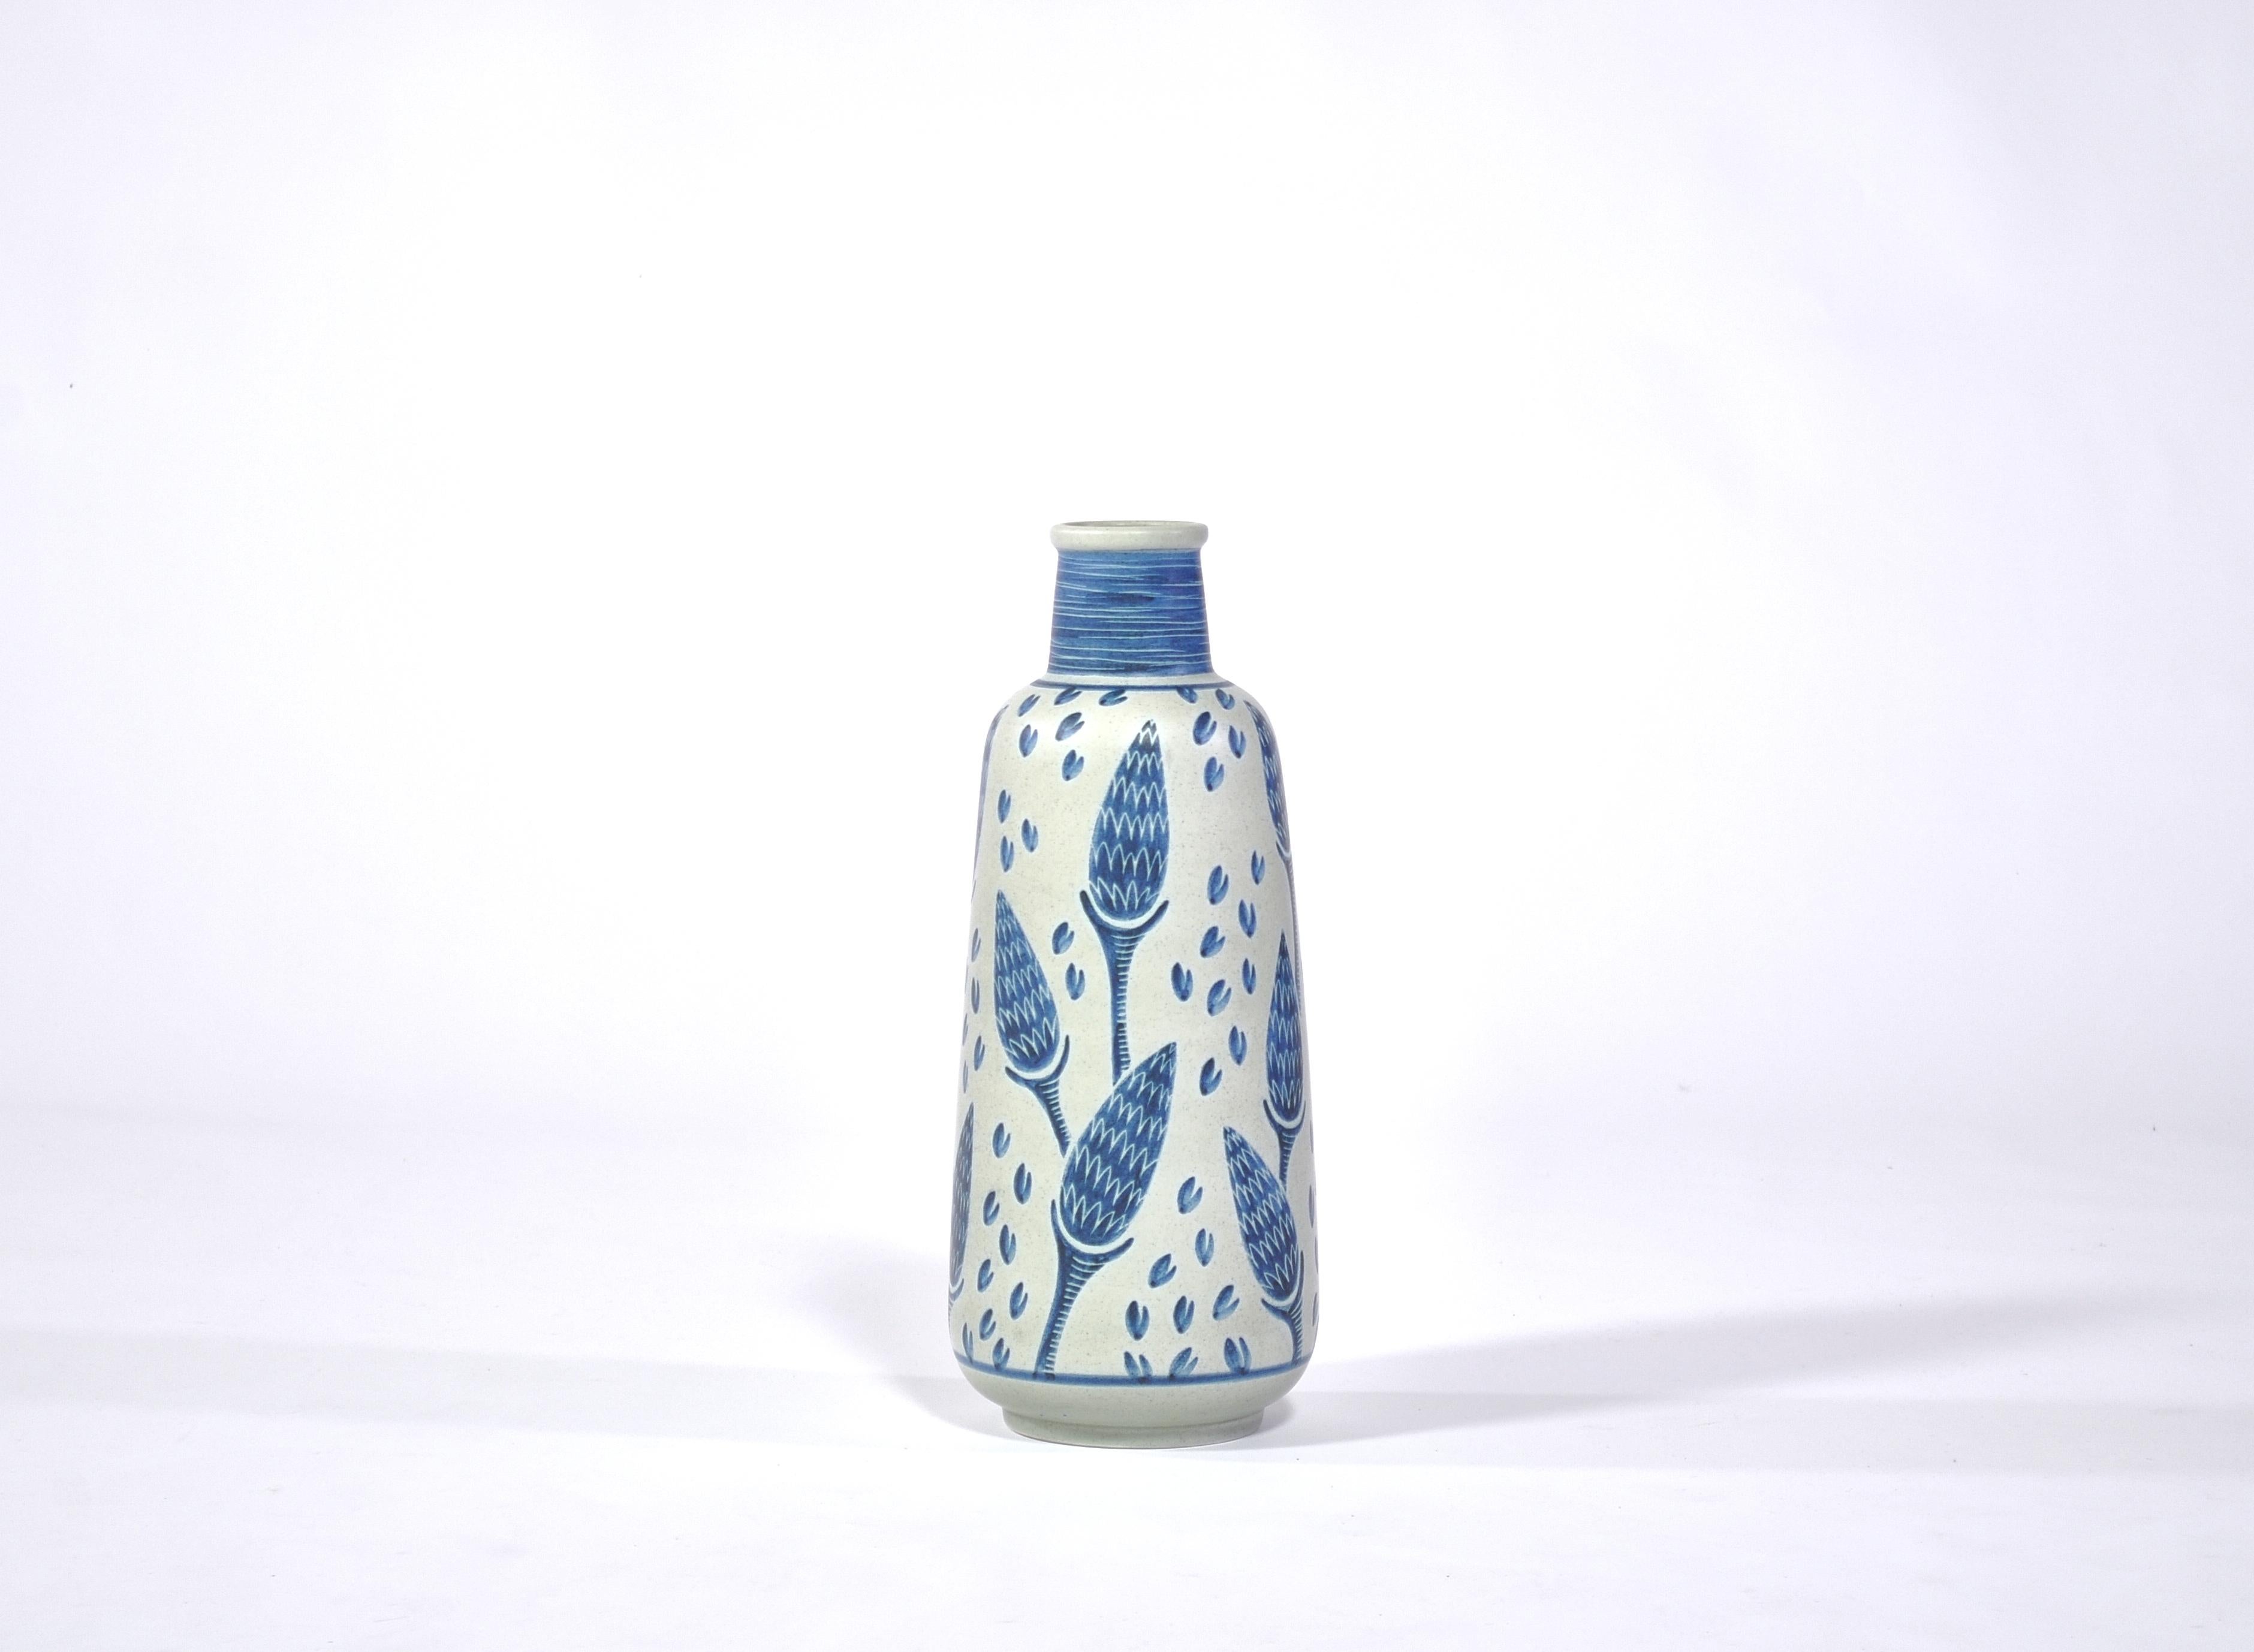 Hand painted floor vase from the 1960s by Danish artist Rigmor Nielsen at Søholm ceramics workshop, Bornholm. Each of these vases were made by hand and are unique in their decorations. This example features a beautiful corn motif in blue and white